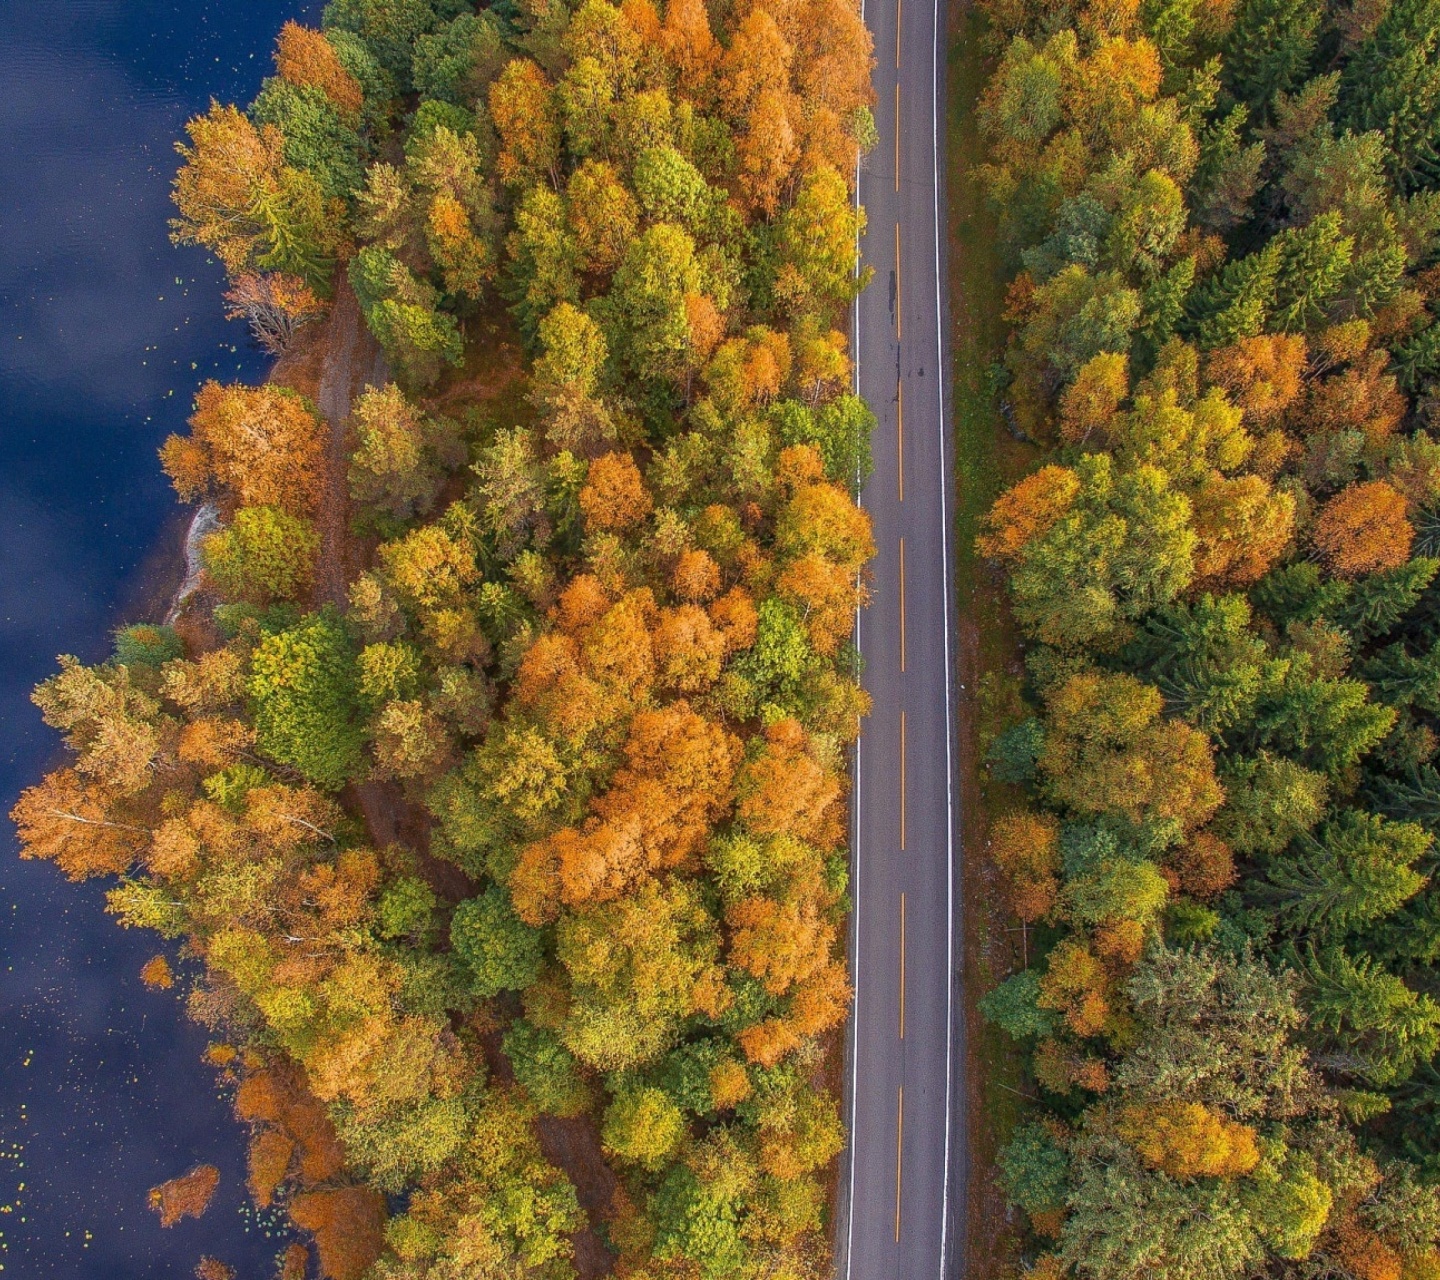 Drone photo of autumn forest screenshot #1 1440x1280